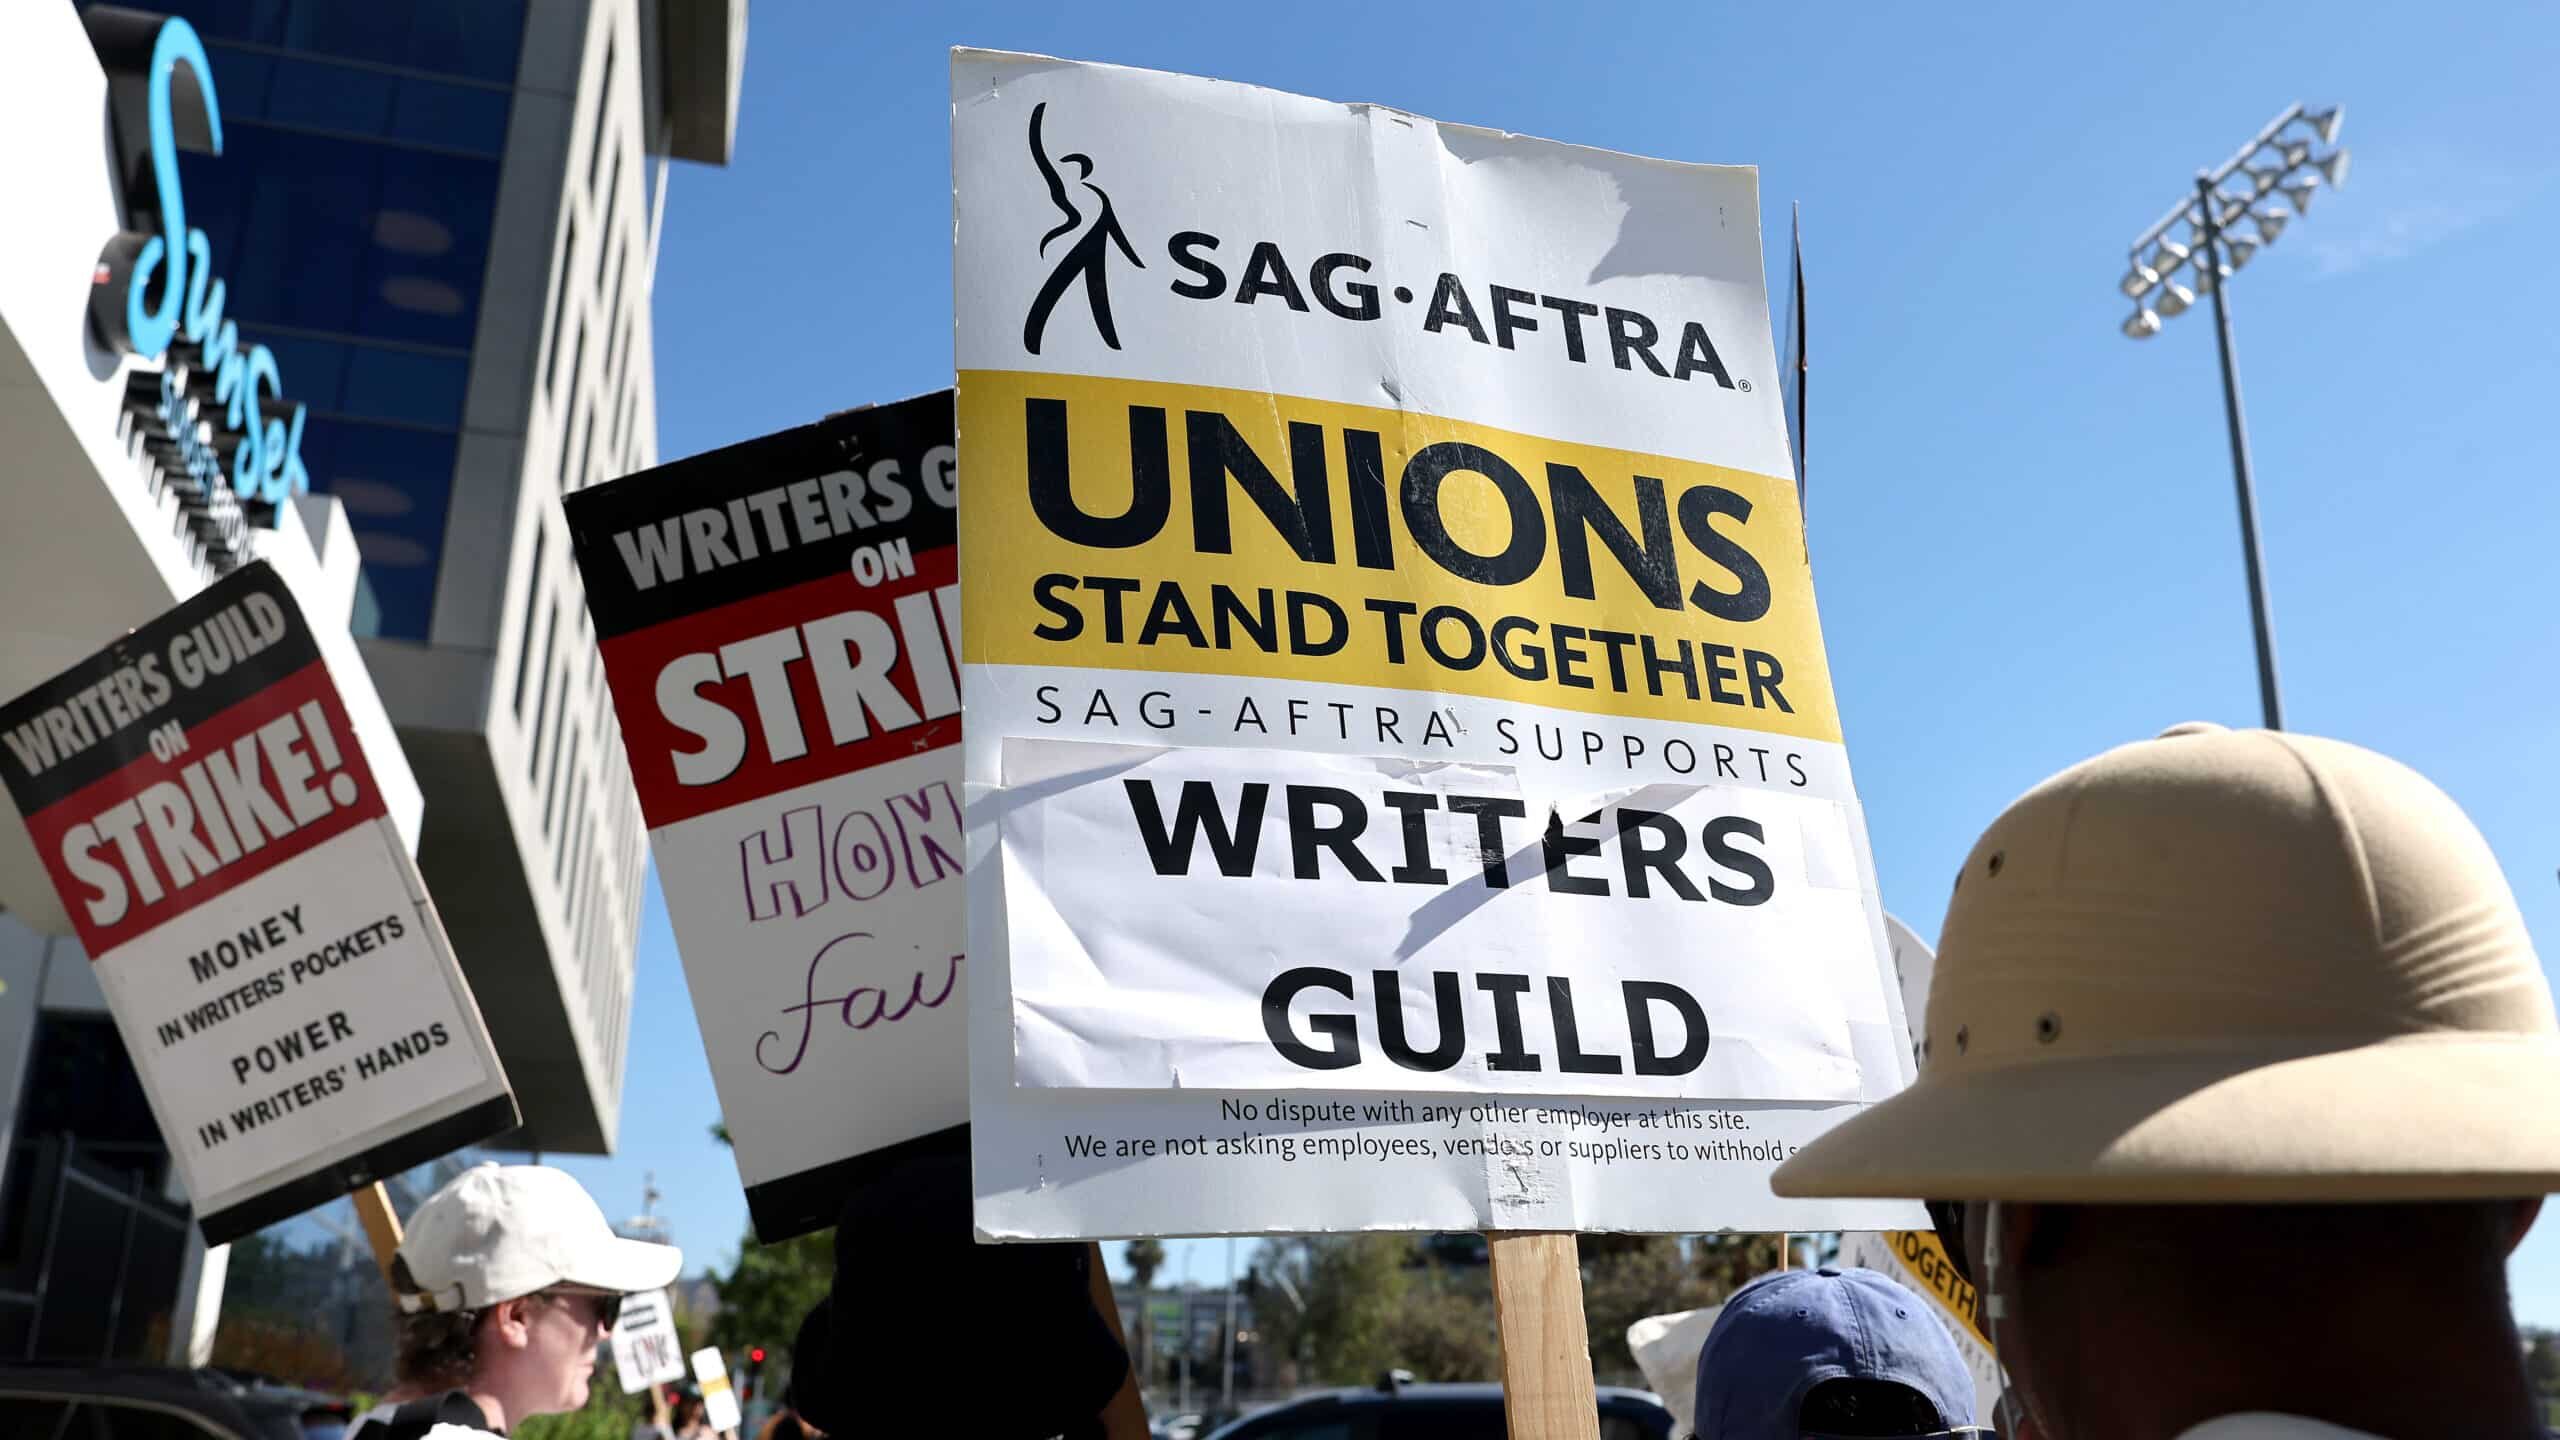 LOS ANGELES, CALIFORNIA - JULY 13: A sign reads 'Unions Stand Together' as SAG-AFTRA members walk the picket line in solidarity with striking WGA (Writers Guild of America) workers outside Netflix offices on July 13, 2023 in Los Angeles, California. Members of SAG-AFTRA, Hollywood’s largest union which represents actors and other media professionals, will likely go on strike after a midnight deadline over contract negotiations with studios expired. The strike could shut down Hollywood productions completely with writers in the third month of their strike against Hollywood studios.